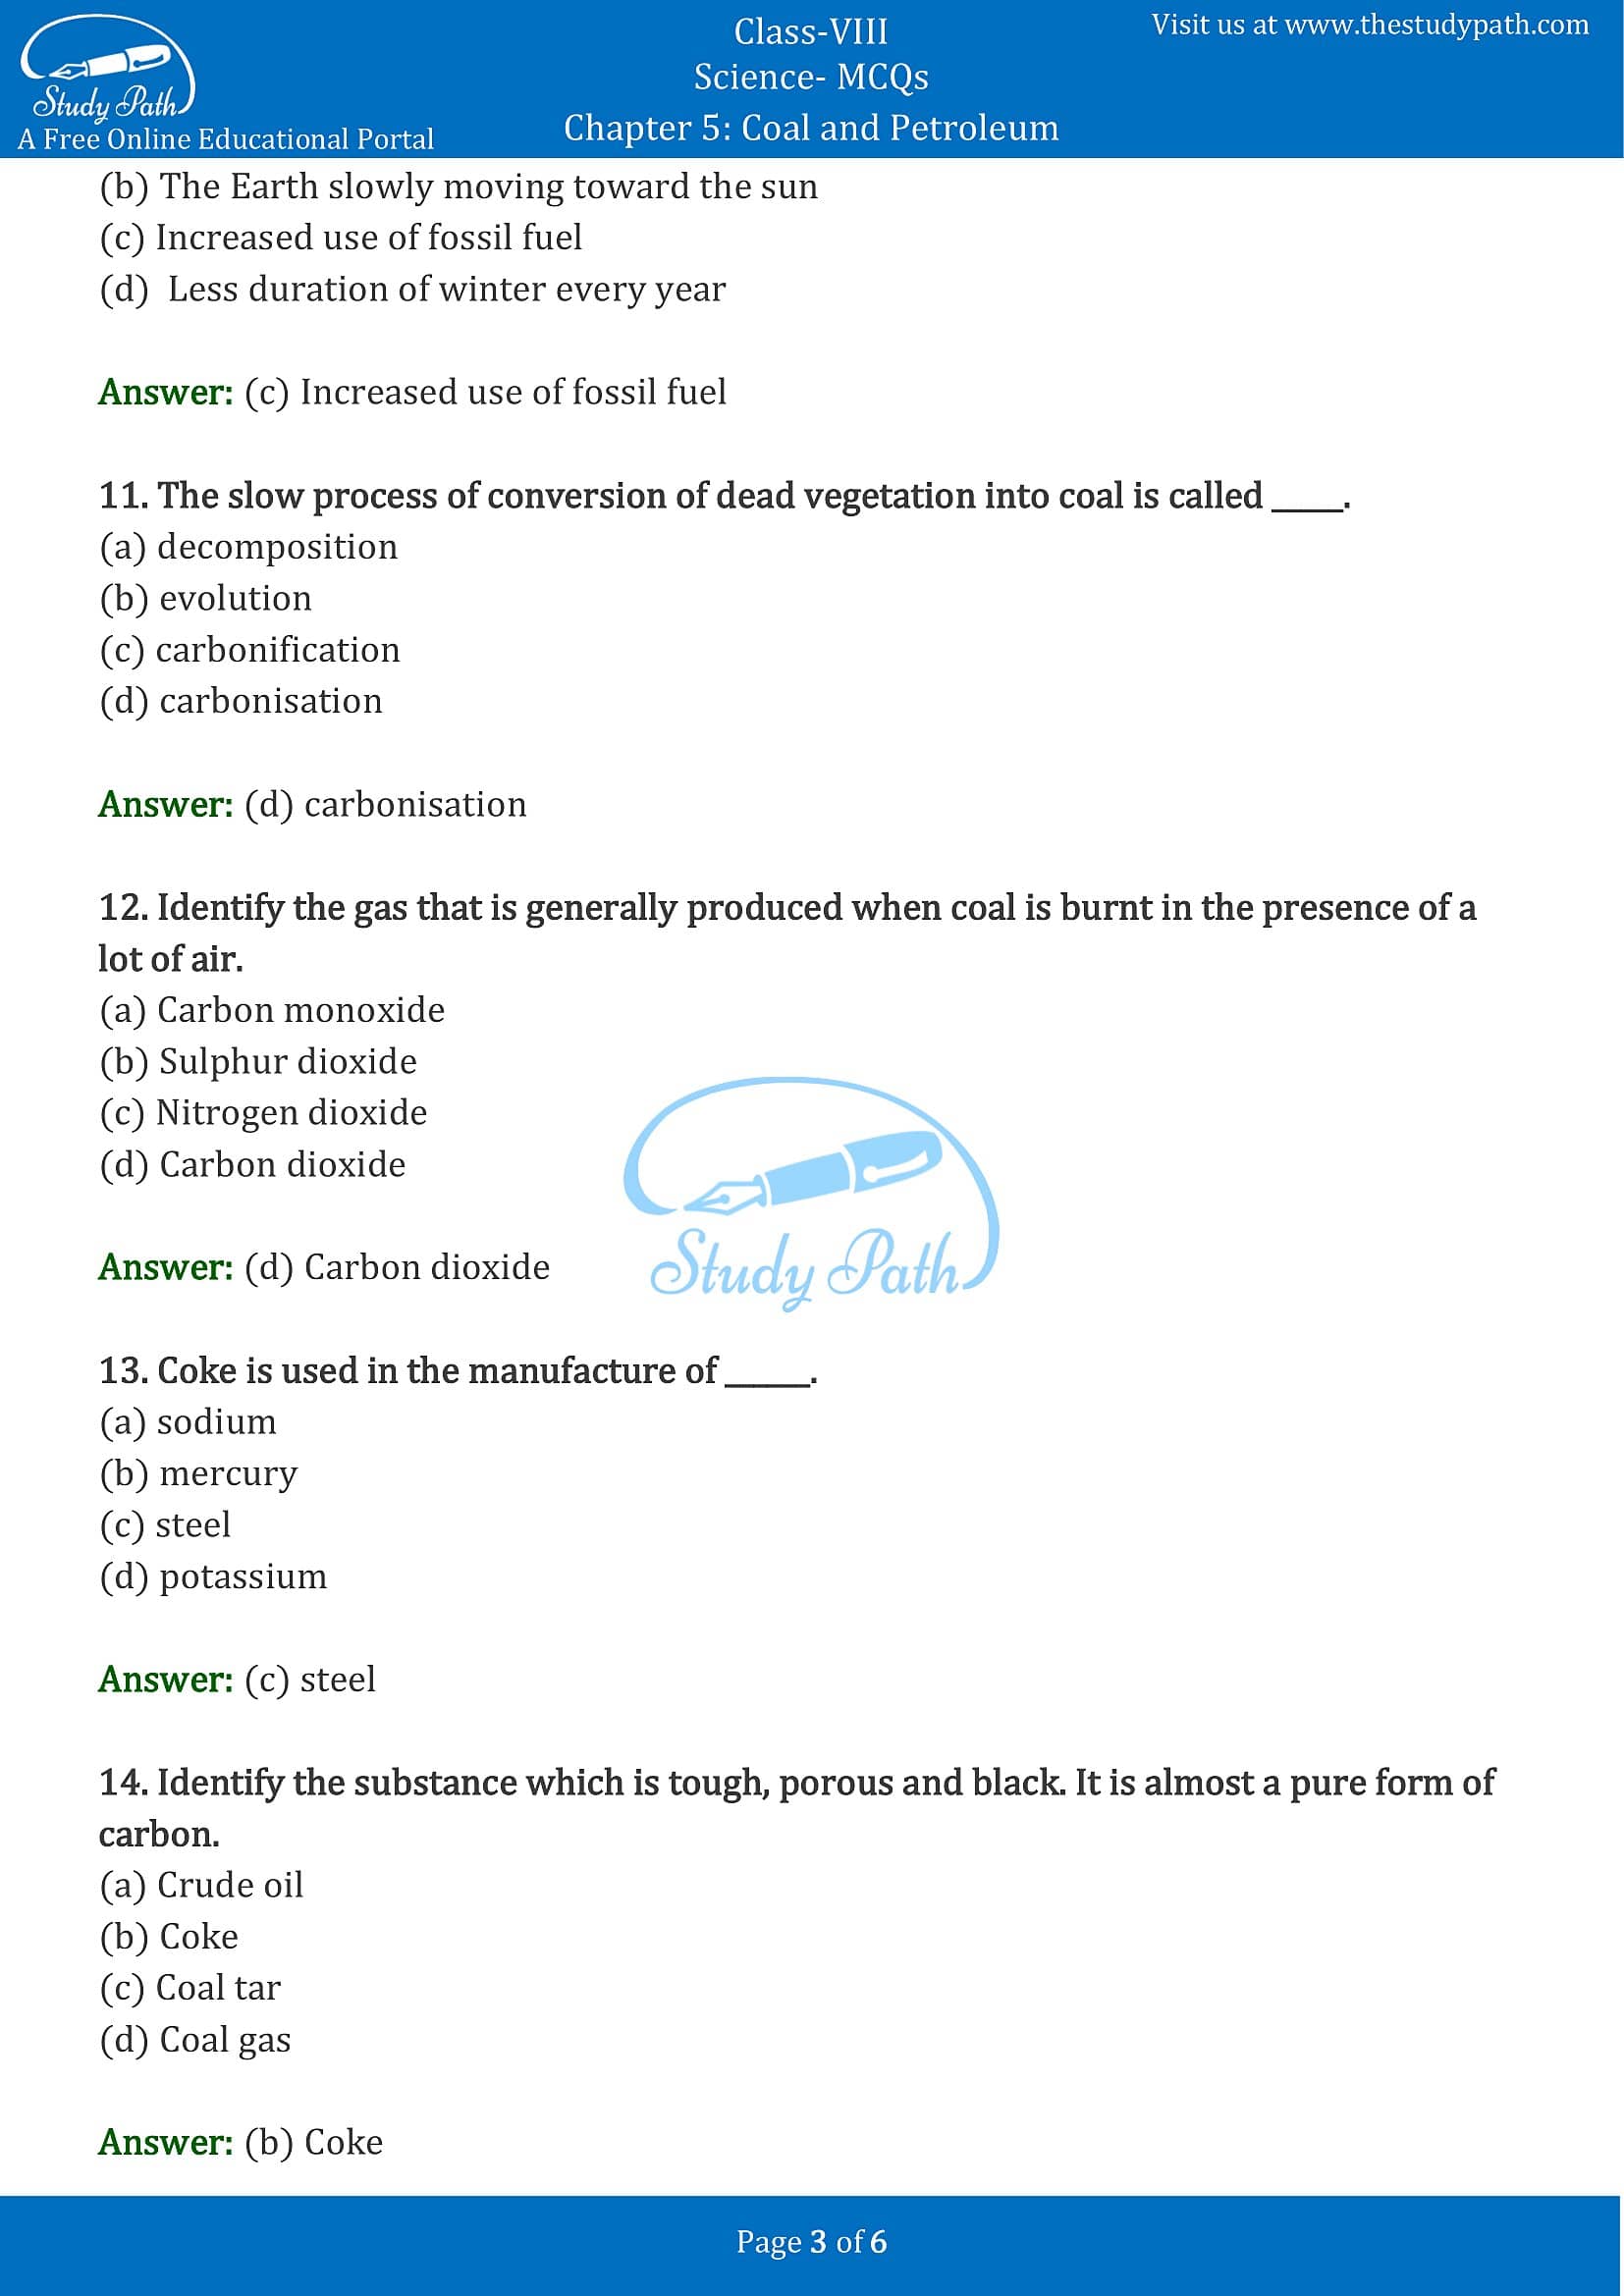 MCQ Questions for Class 8 Science Chapter 5 Coal and Petroleum with Answers PDF -3